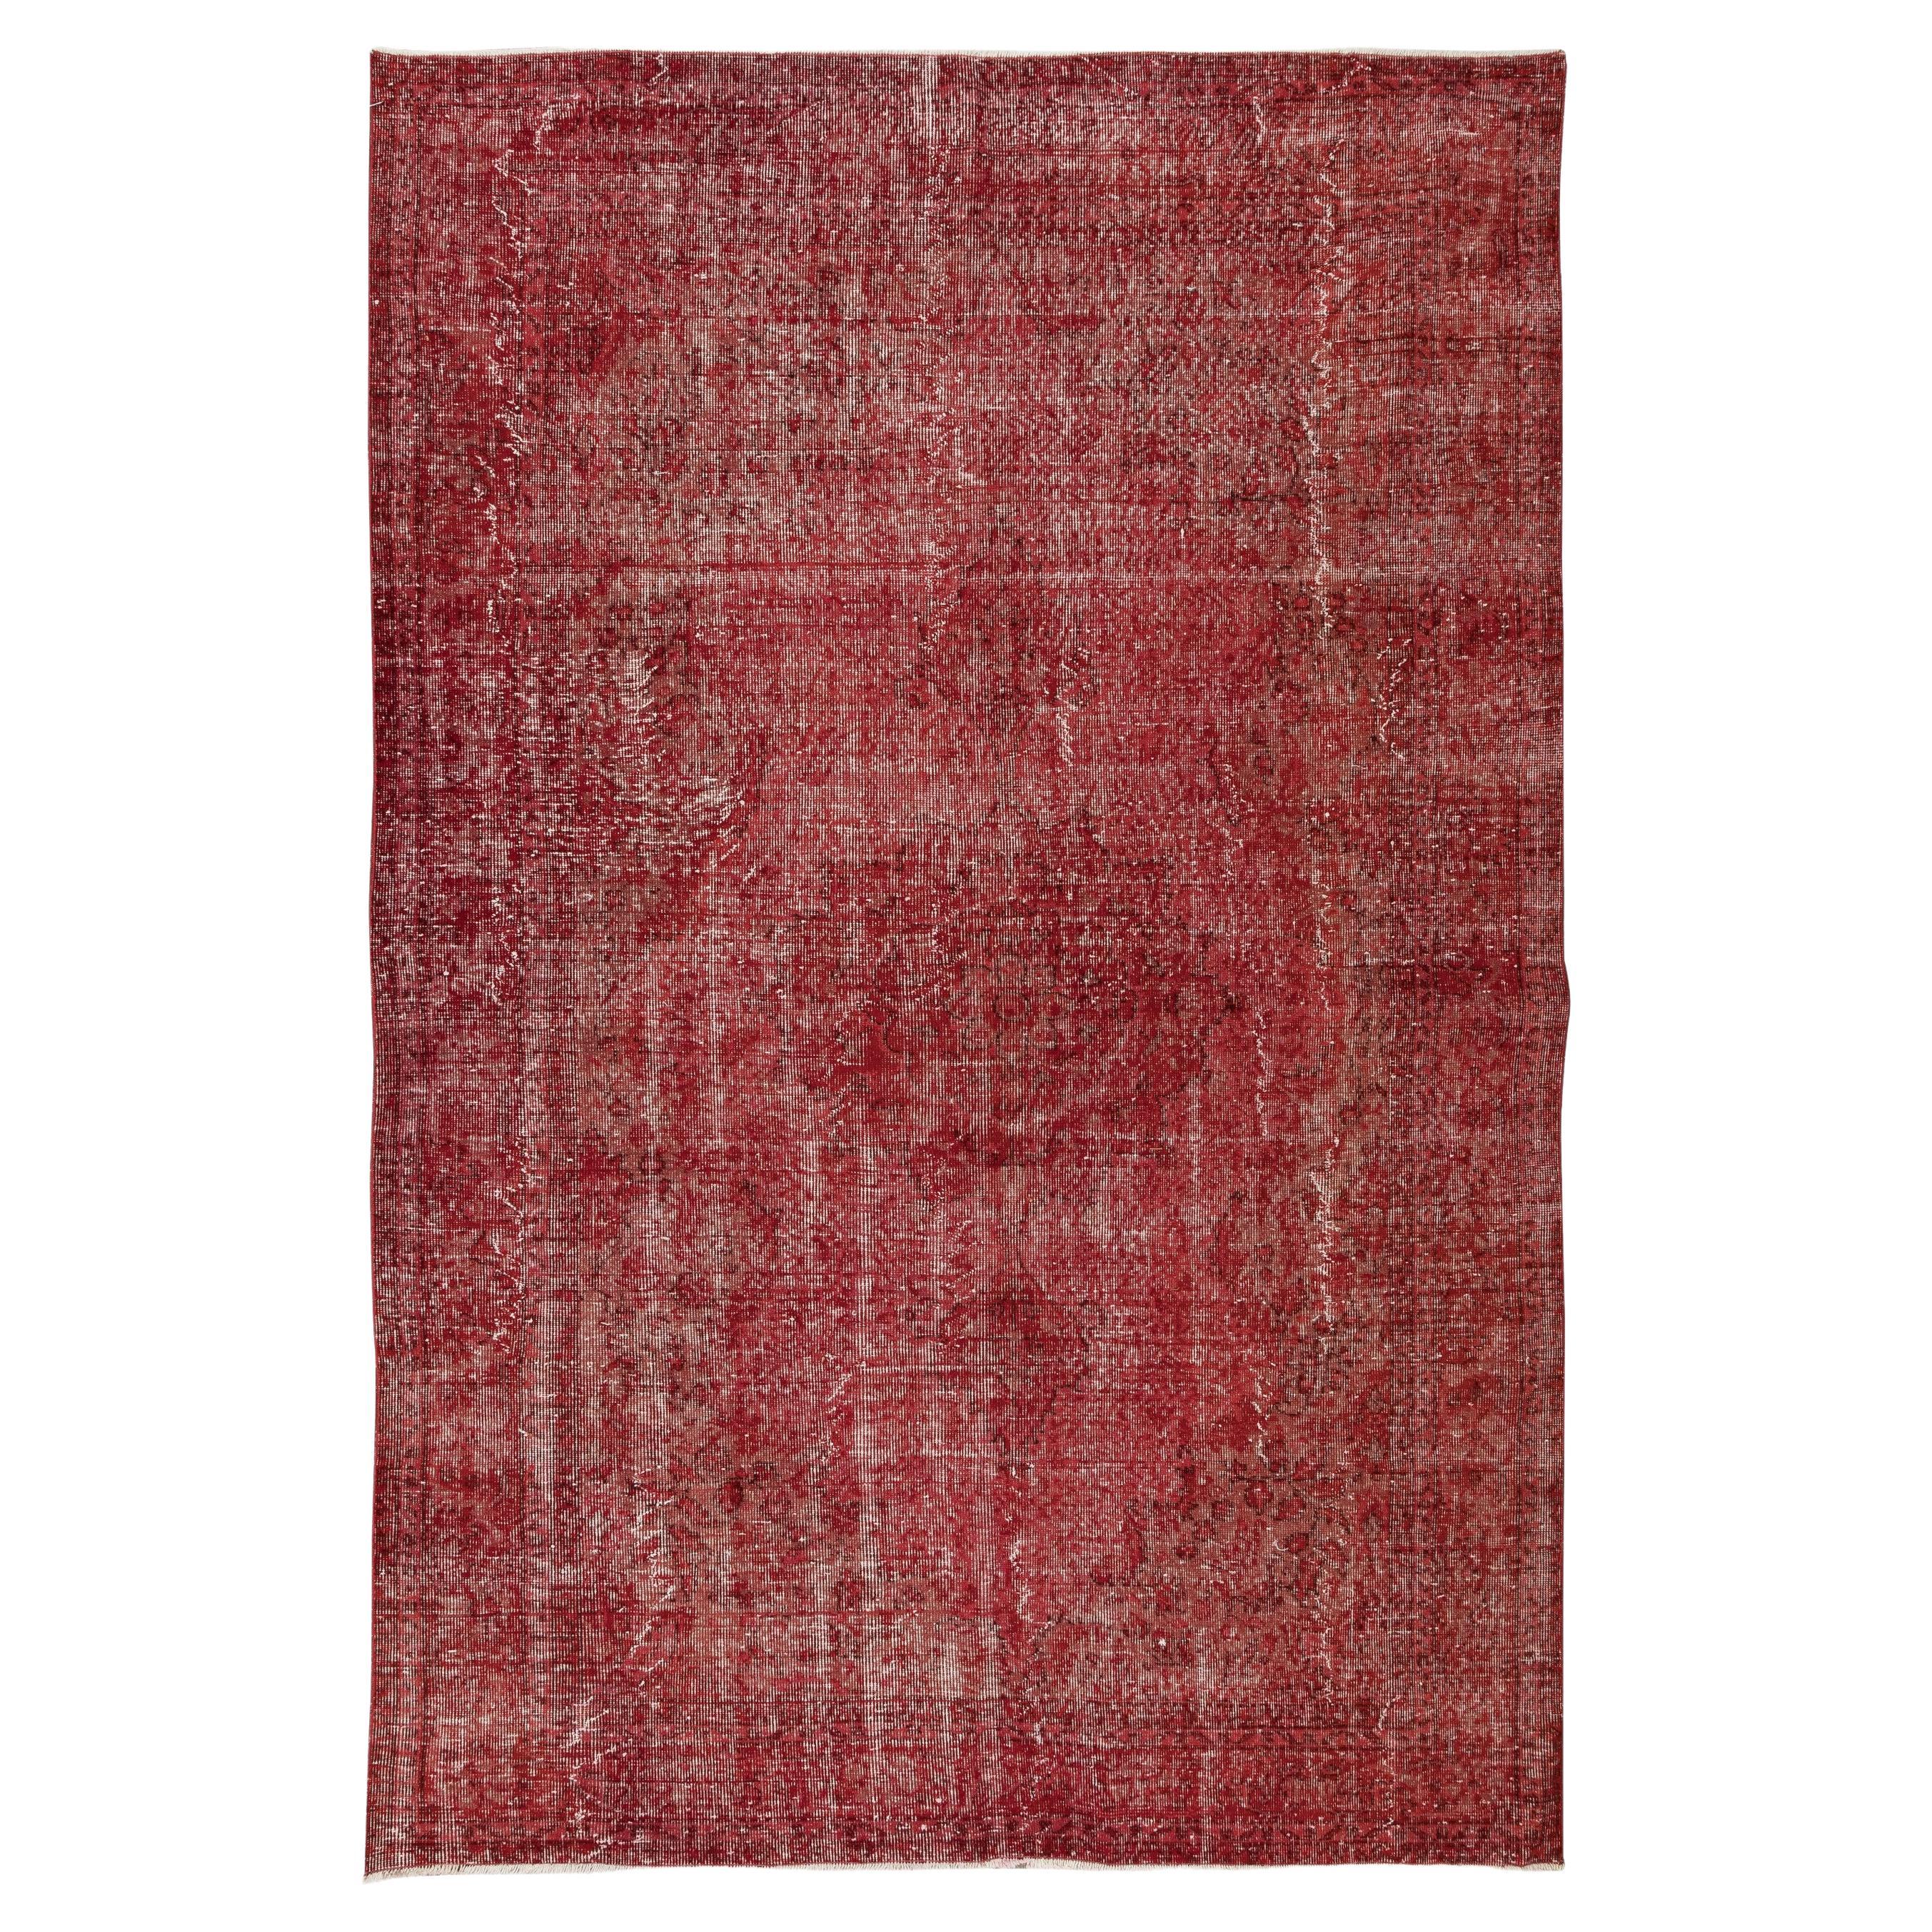 6.7x9.6 Ft Hand Knotted Vintage Turkish Area Rug in Red 4 Modern Interiors For Sale